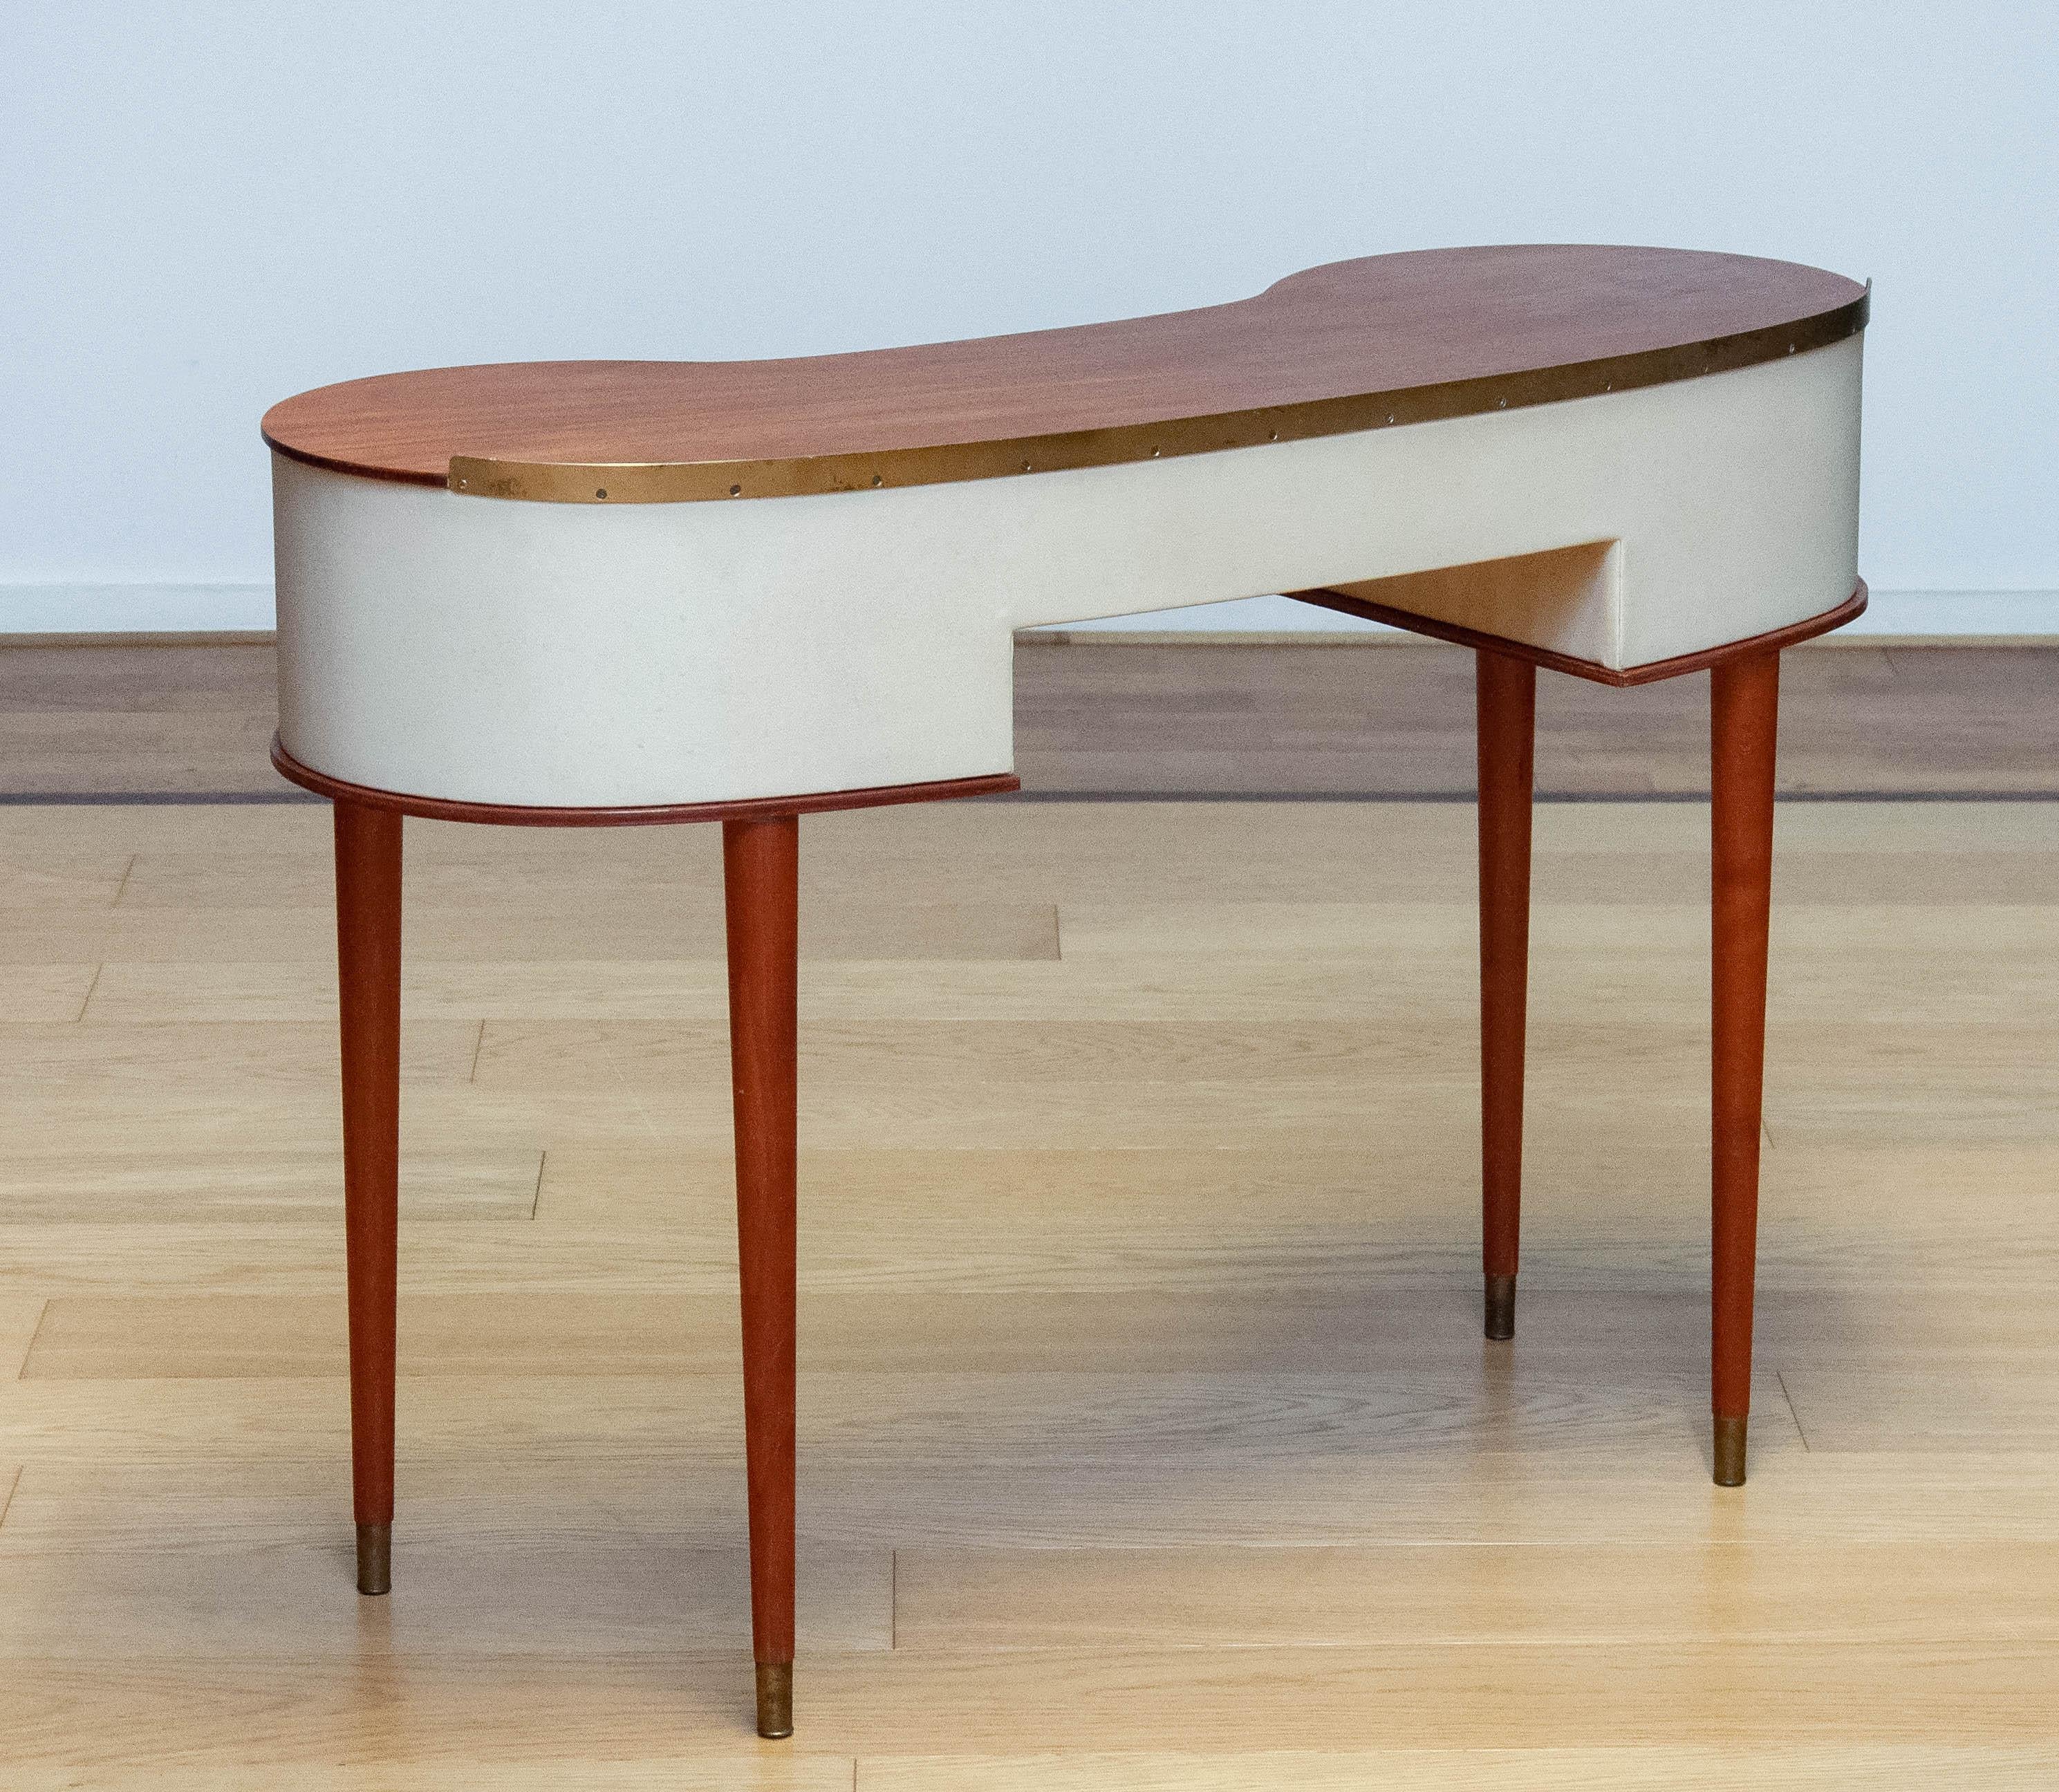 Mid-20th Century 1950s Vanity Dressing Table Designed By Halvdan Pettersson For Tibro In Sweden.